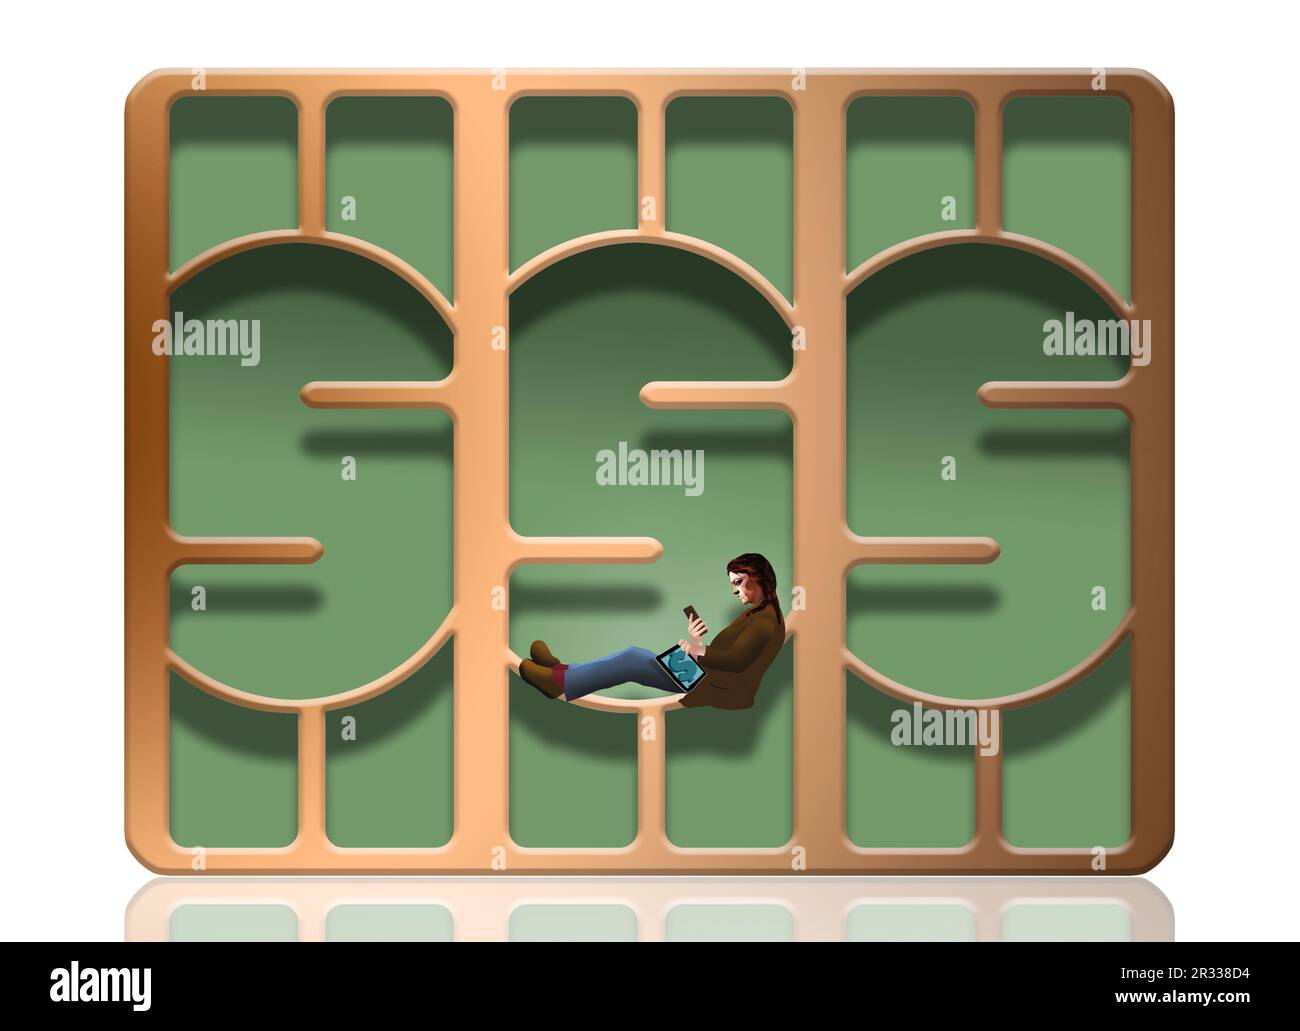 A person rests and looks at a cell phone checking banking information. They are sitting in a framework that looks like dollar signs in this 3-d illust Stock Photo